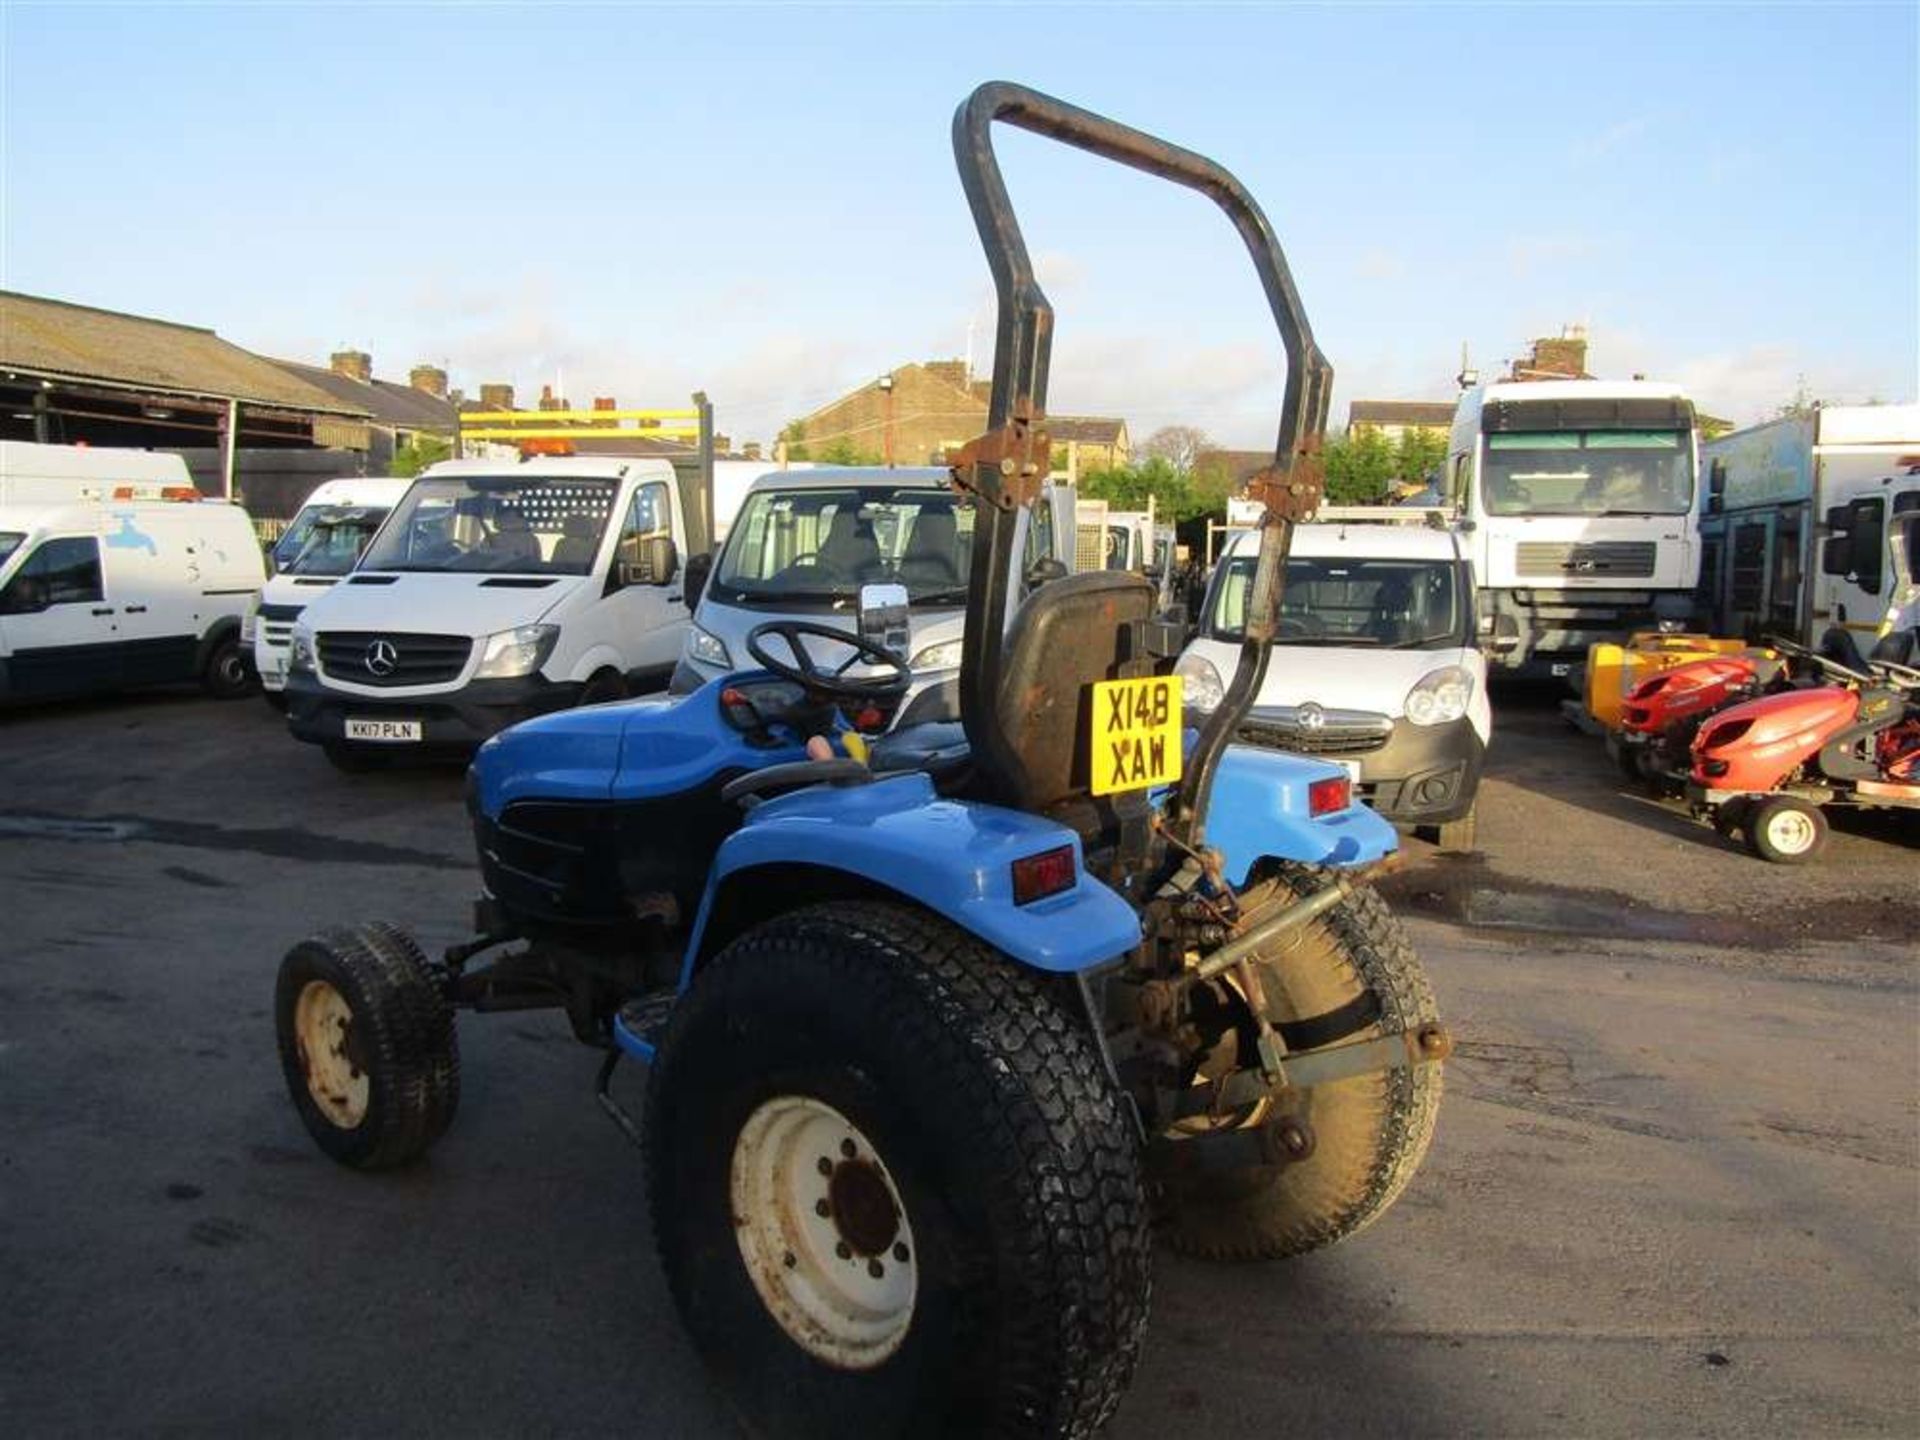 2001 X reg New Holland Agric Tractor 2 Axle Rigid Body - Image 3 of 5